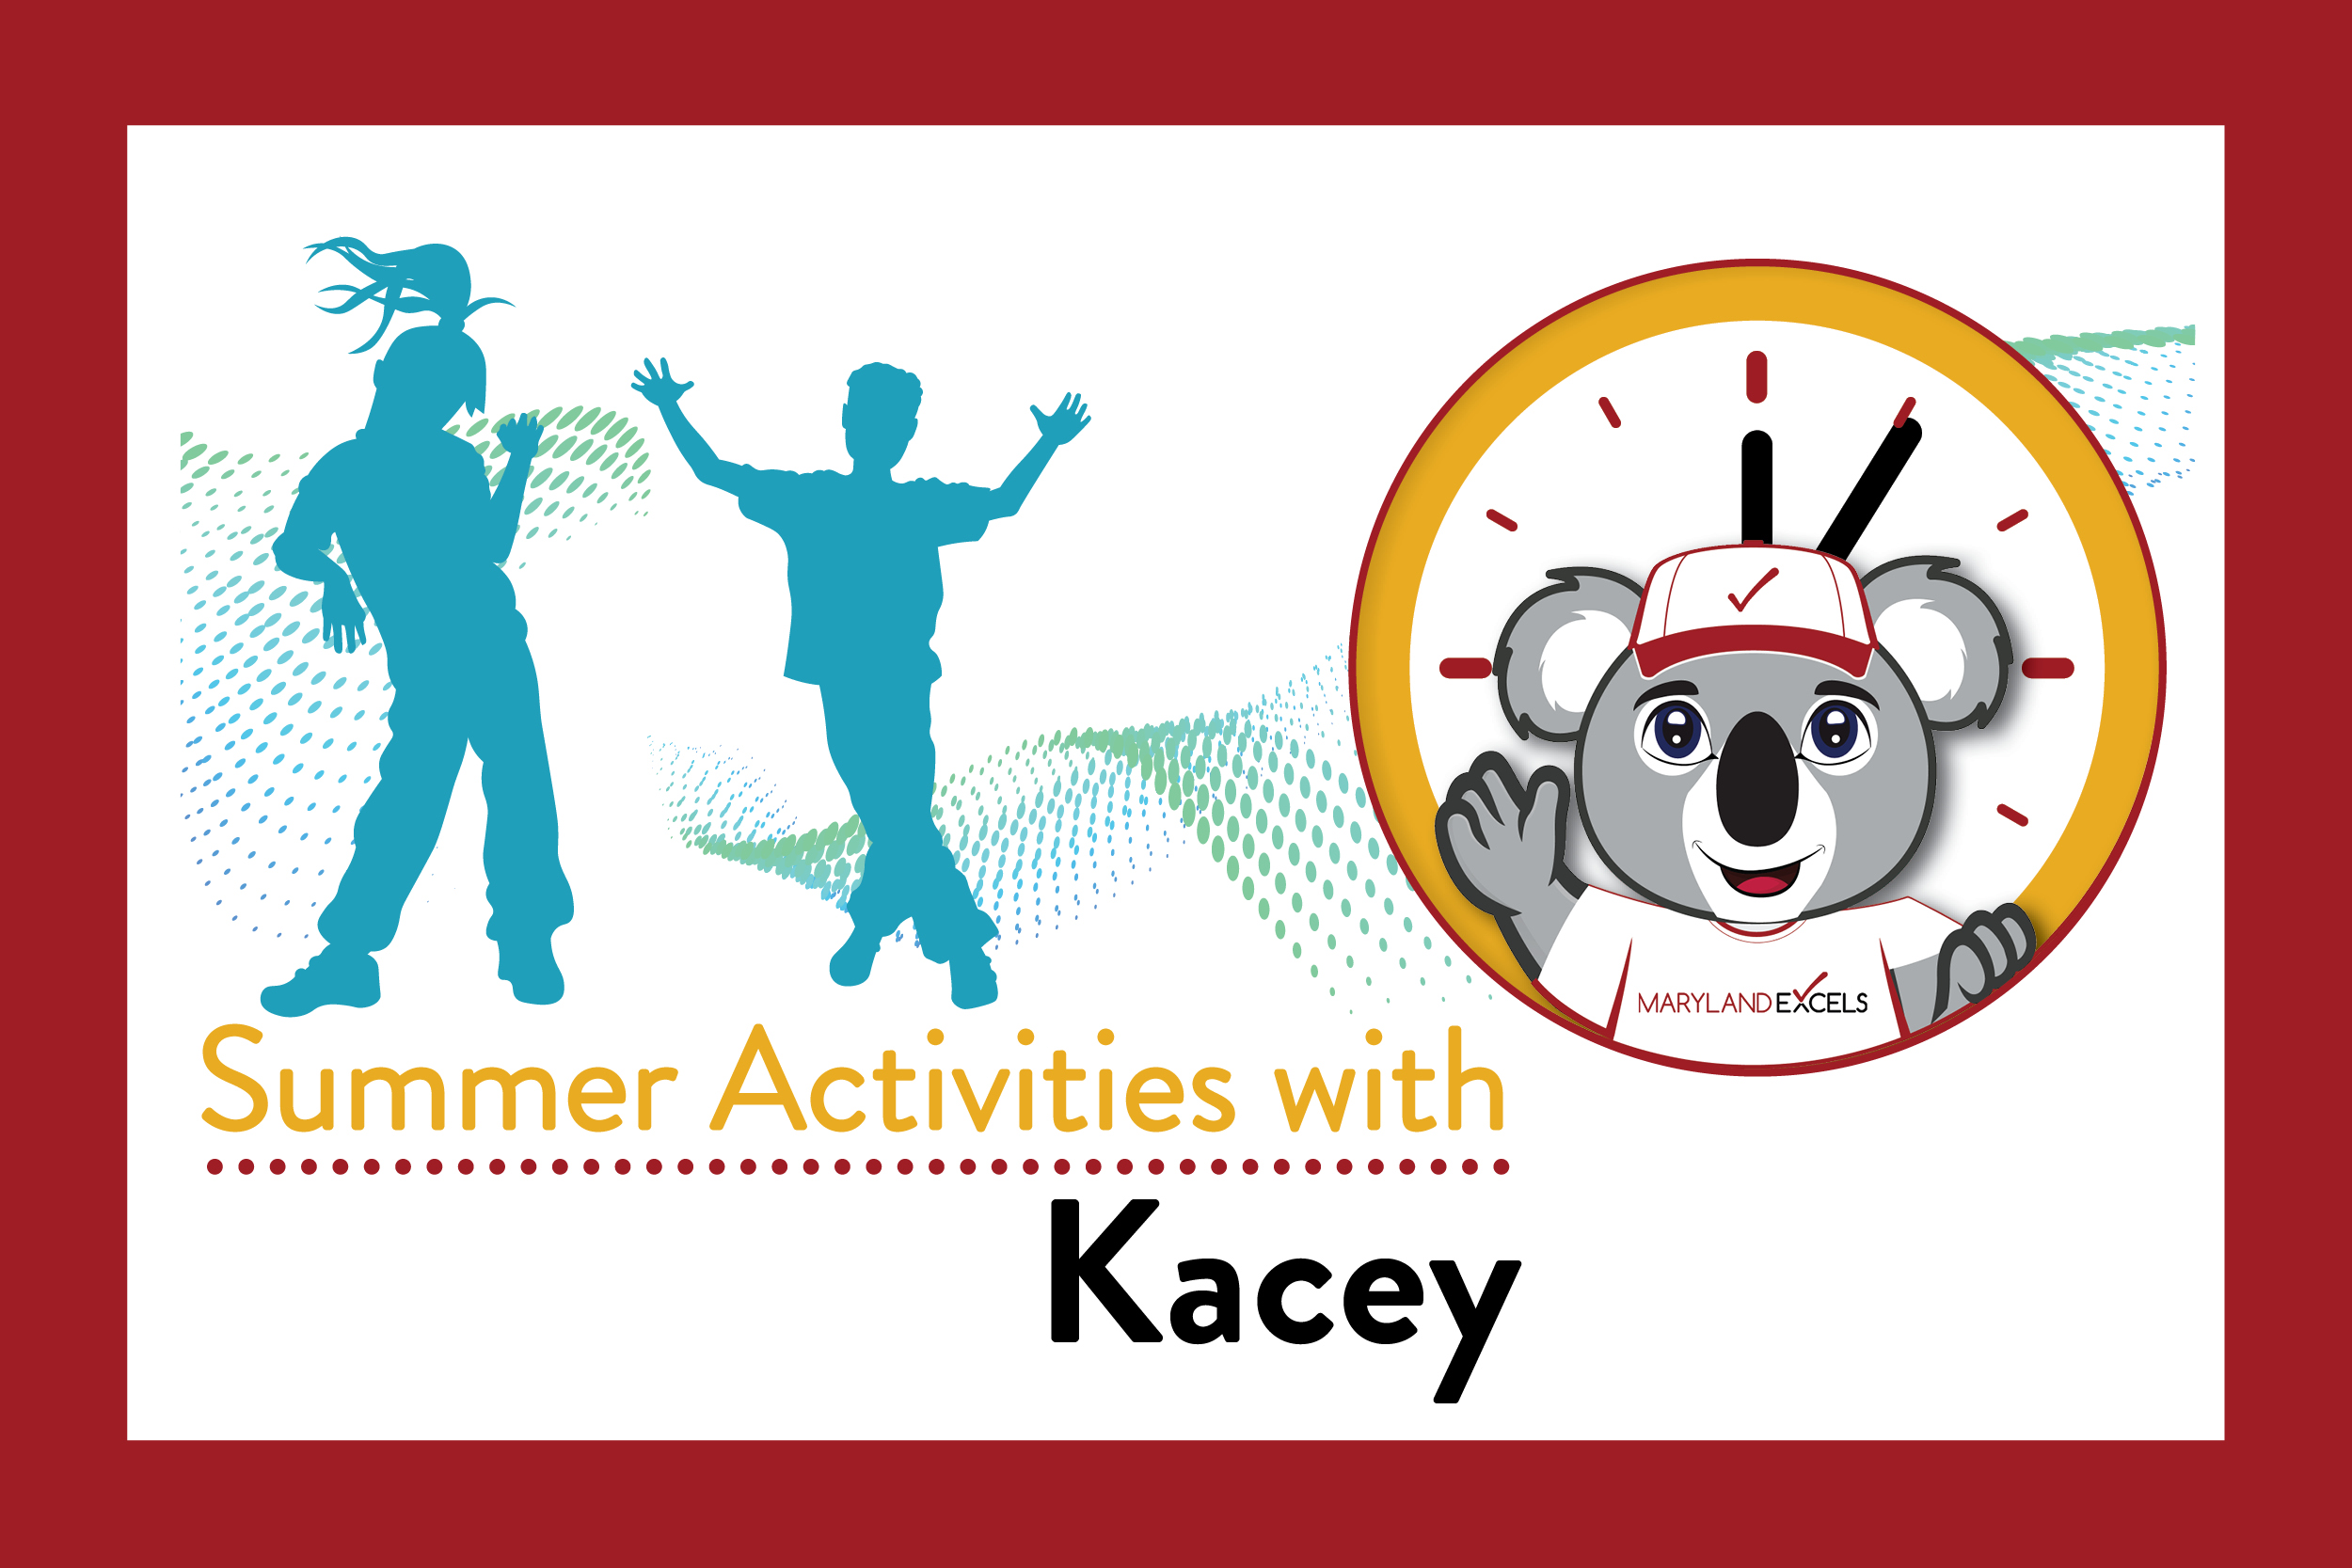 Summer activities with Kacey